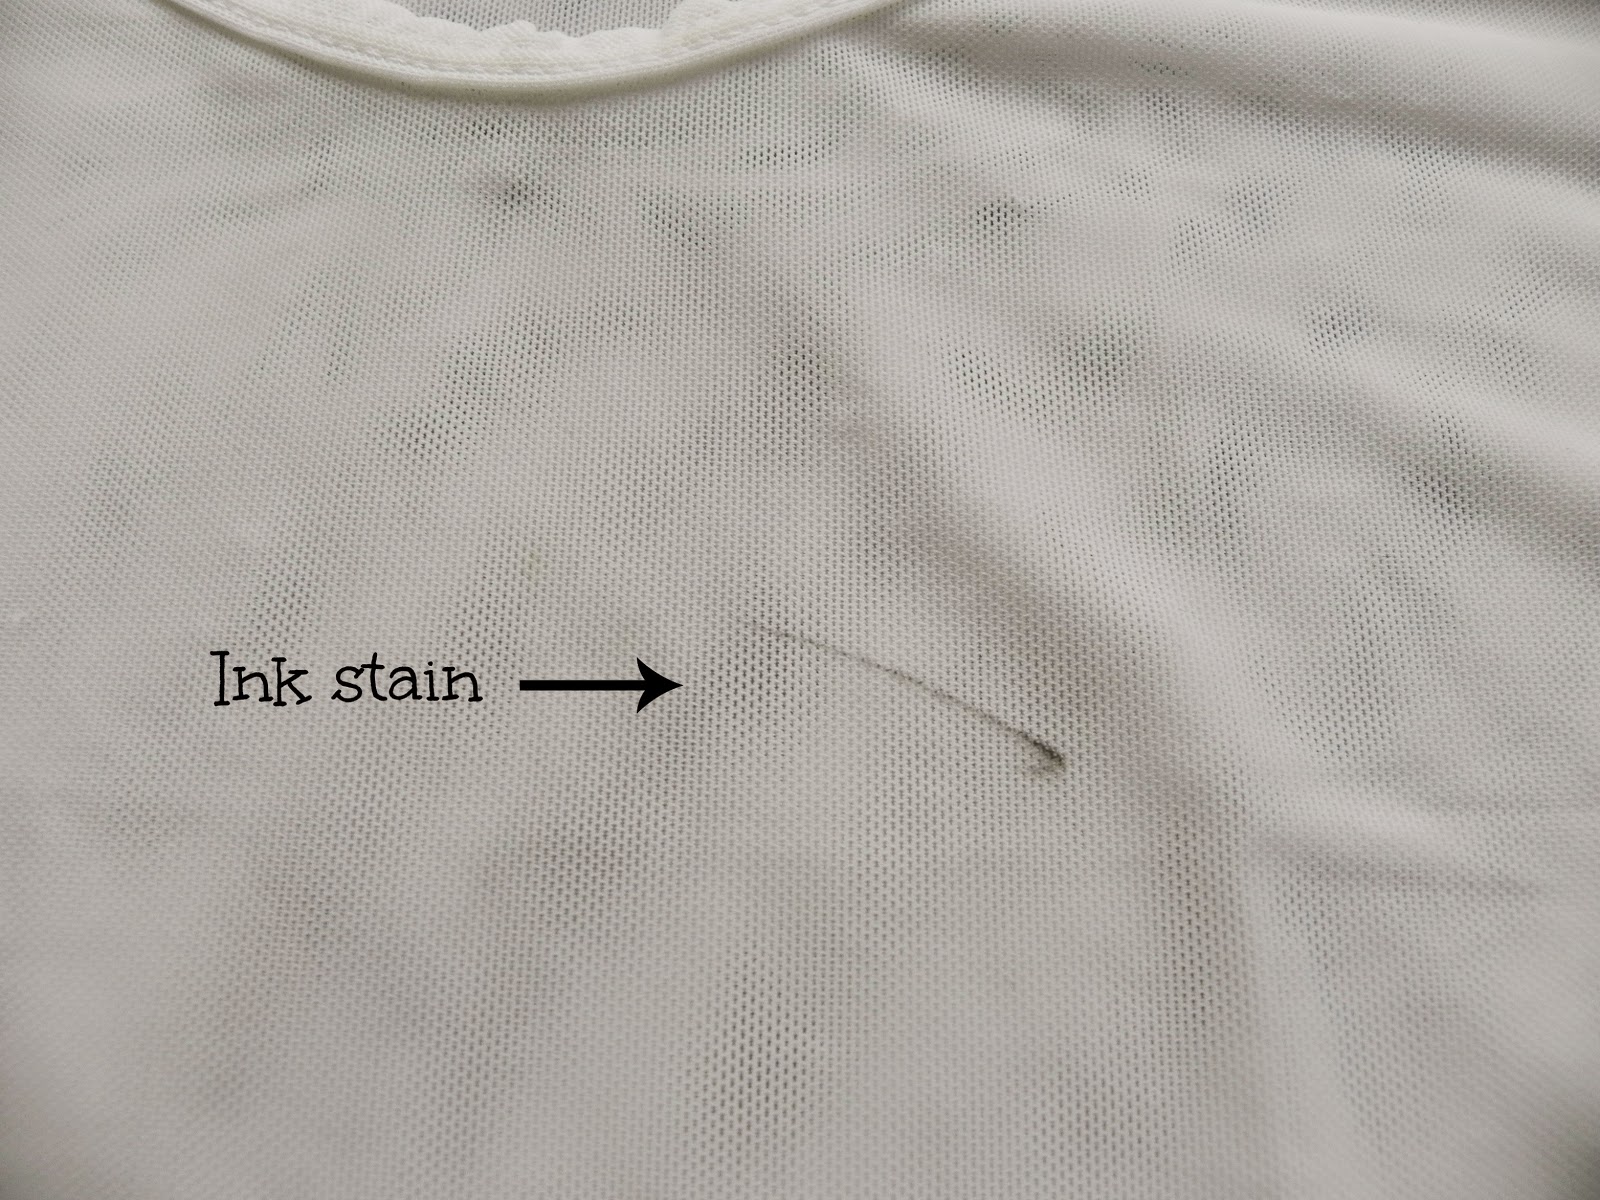 Sheer Serendipity How to remove ink stain on clothing